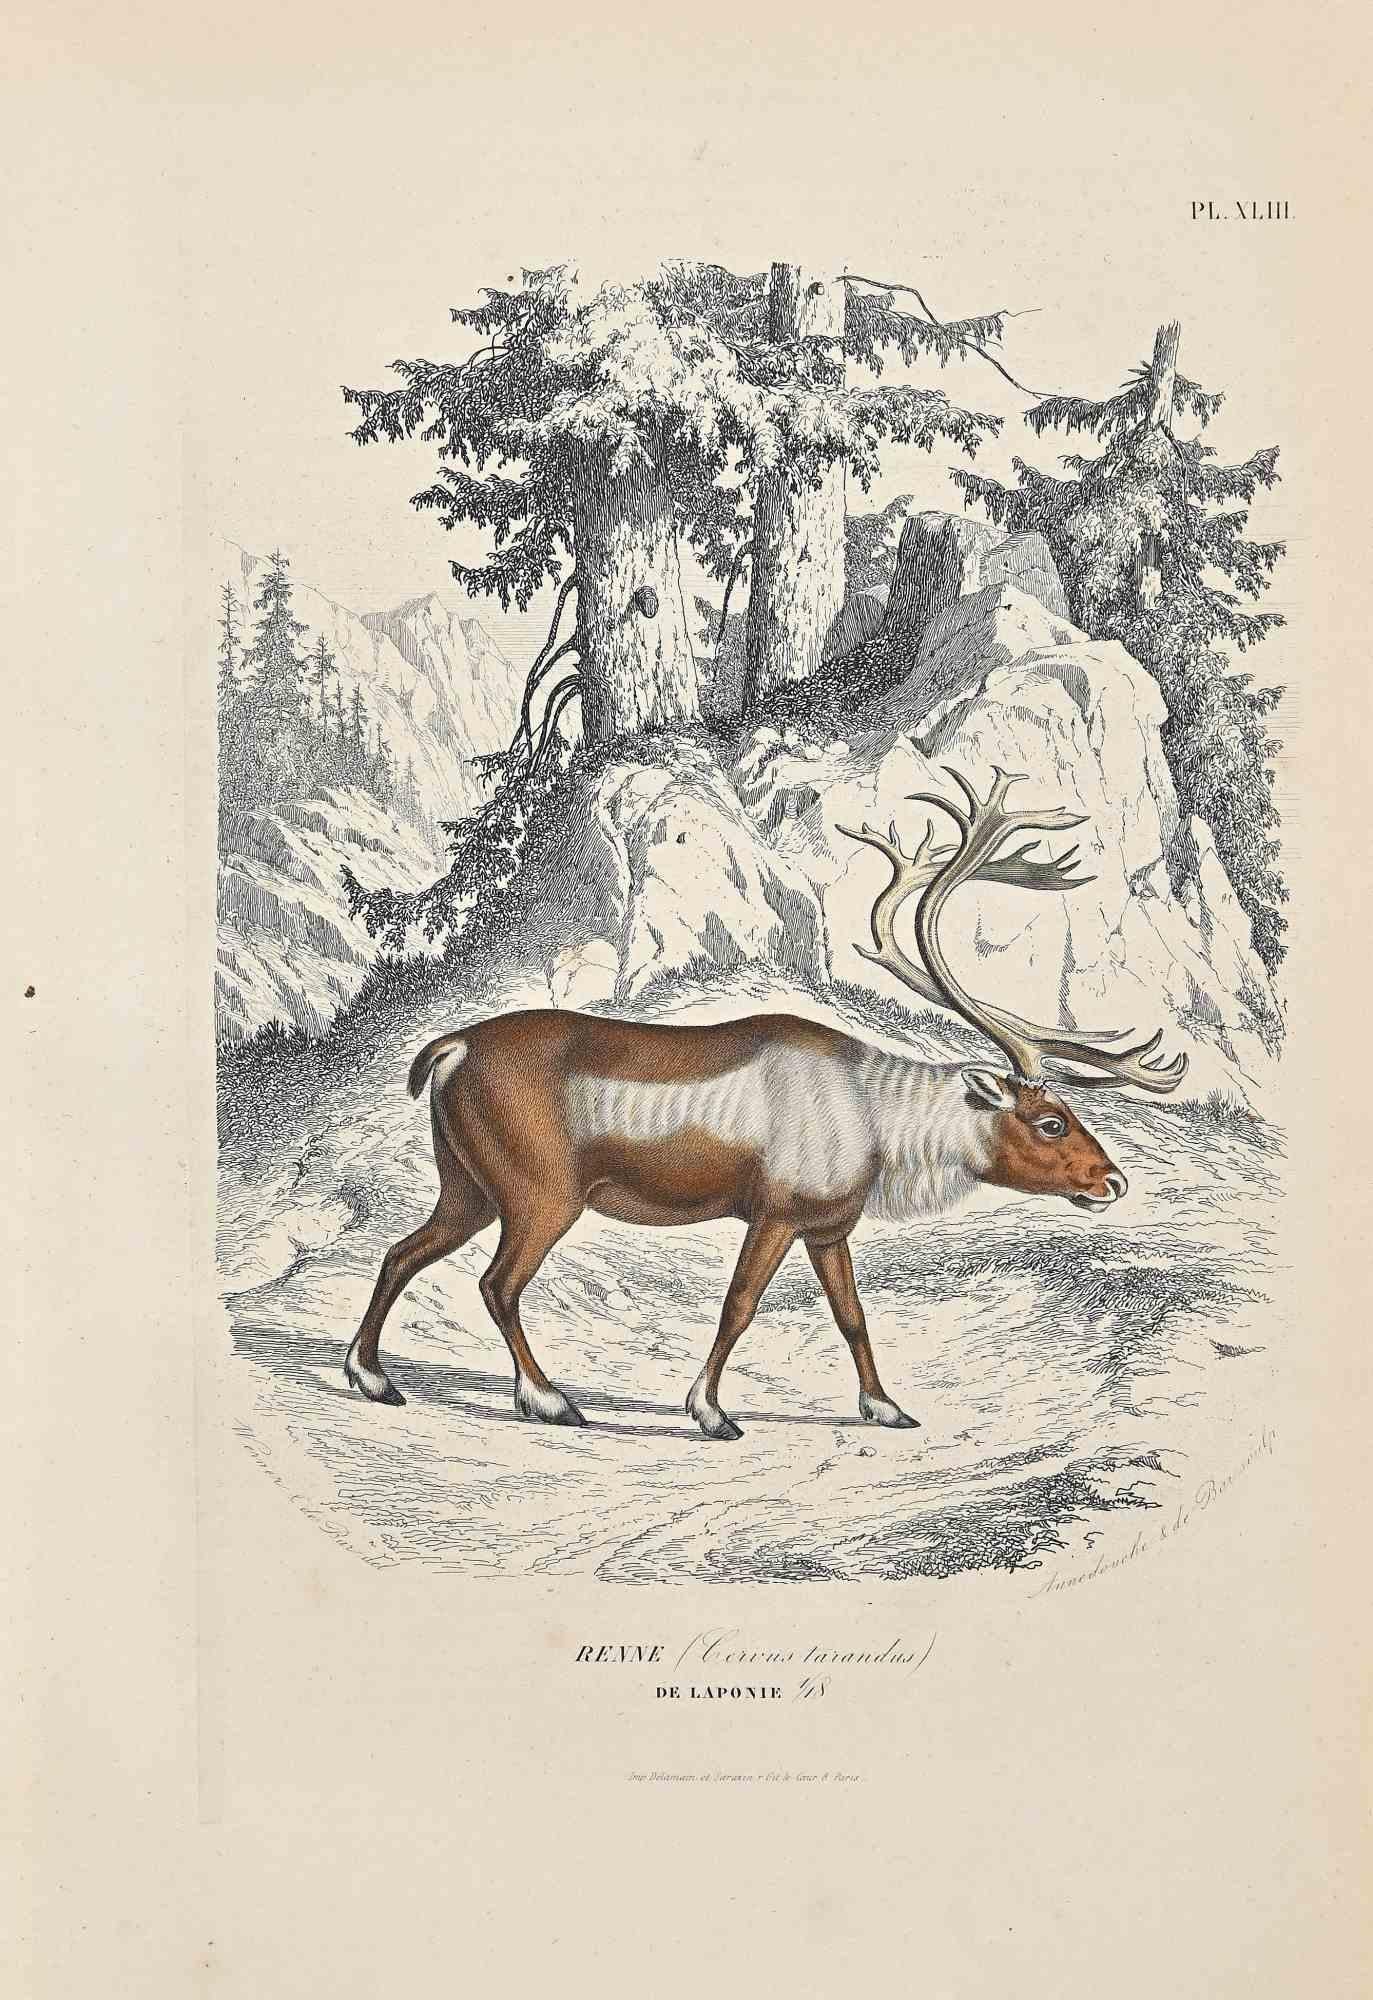 The Reindeer is an original colored lithograph on ivory-colored paper, realized by Paul Gervais (1816-1879). The artwork is from the series of "Les Trois Règnes de la Nature", and was published in 1854.

Good conditions.

Titled on the lower.

The